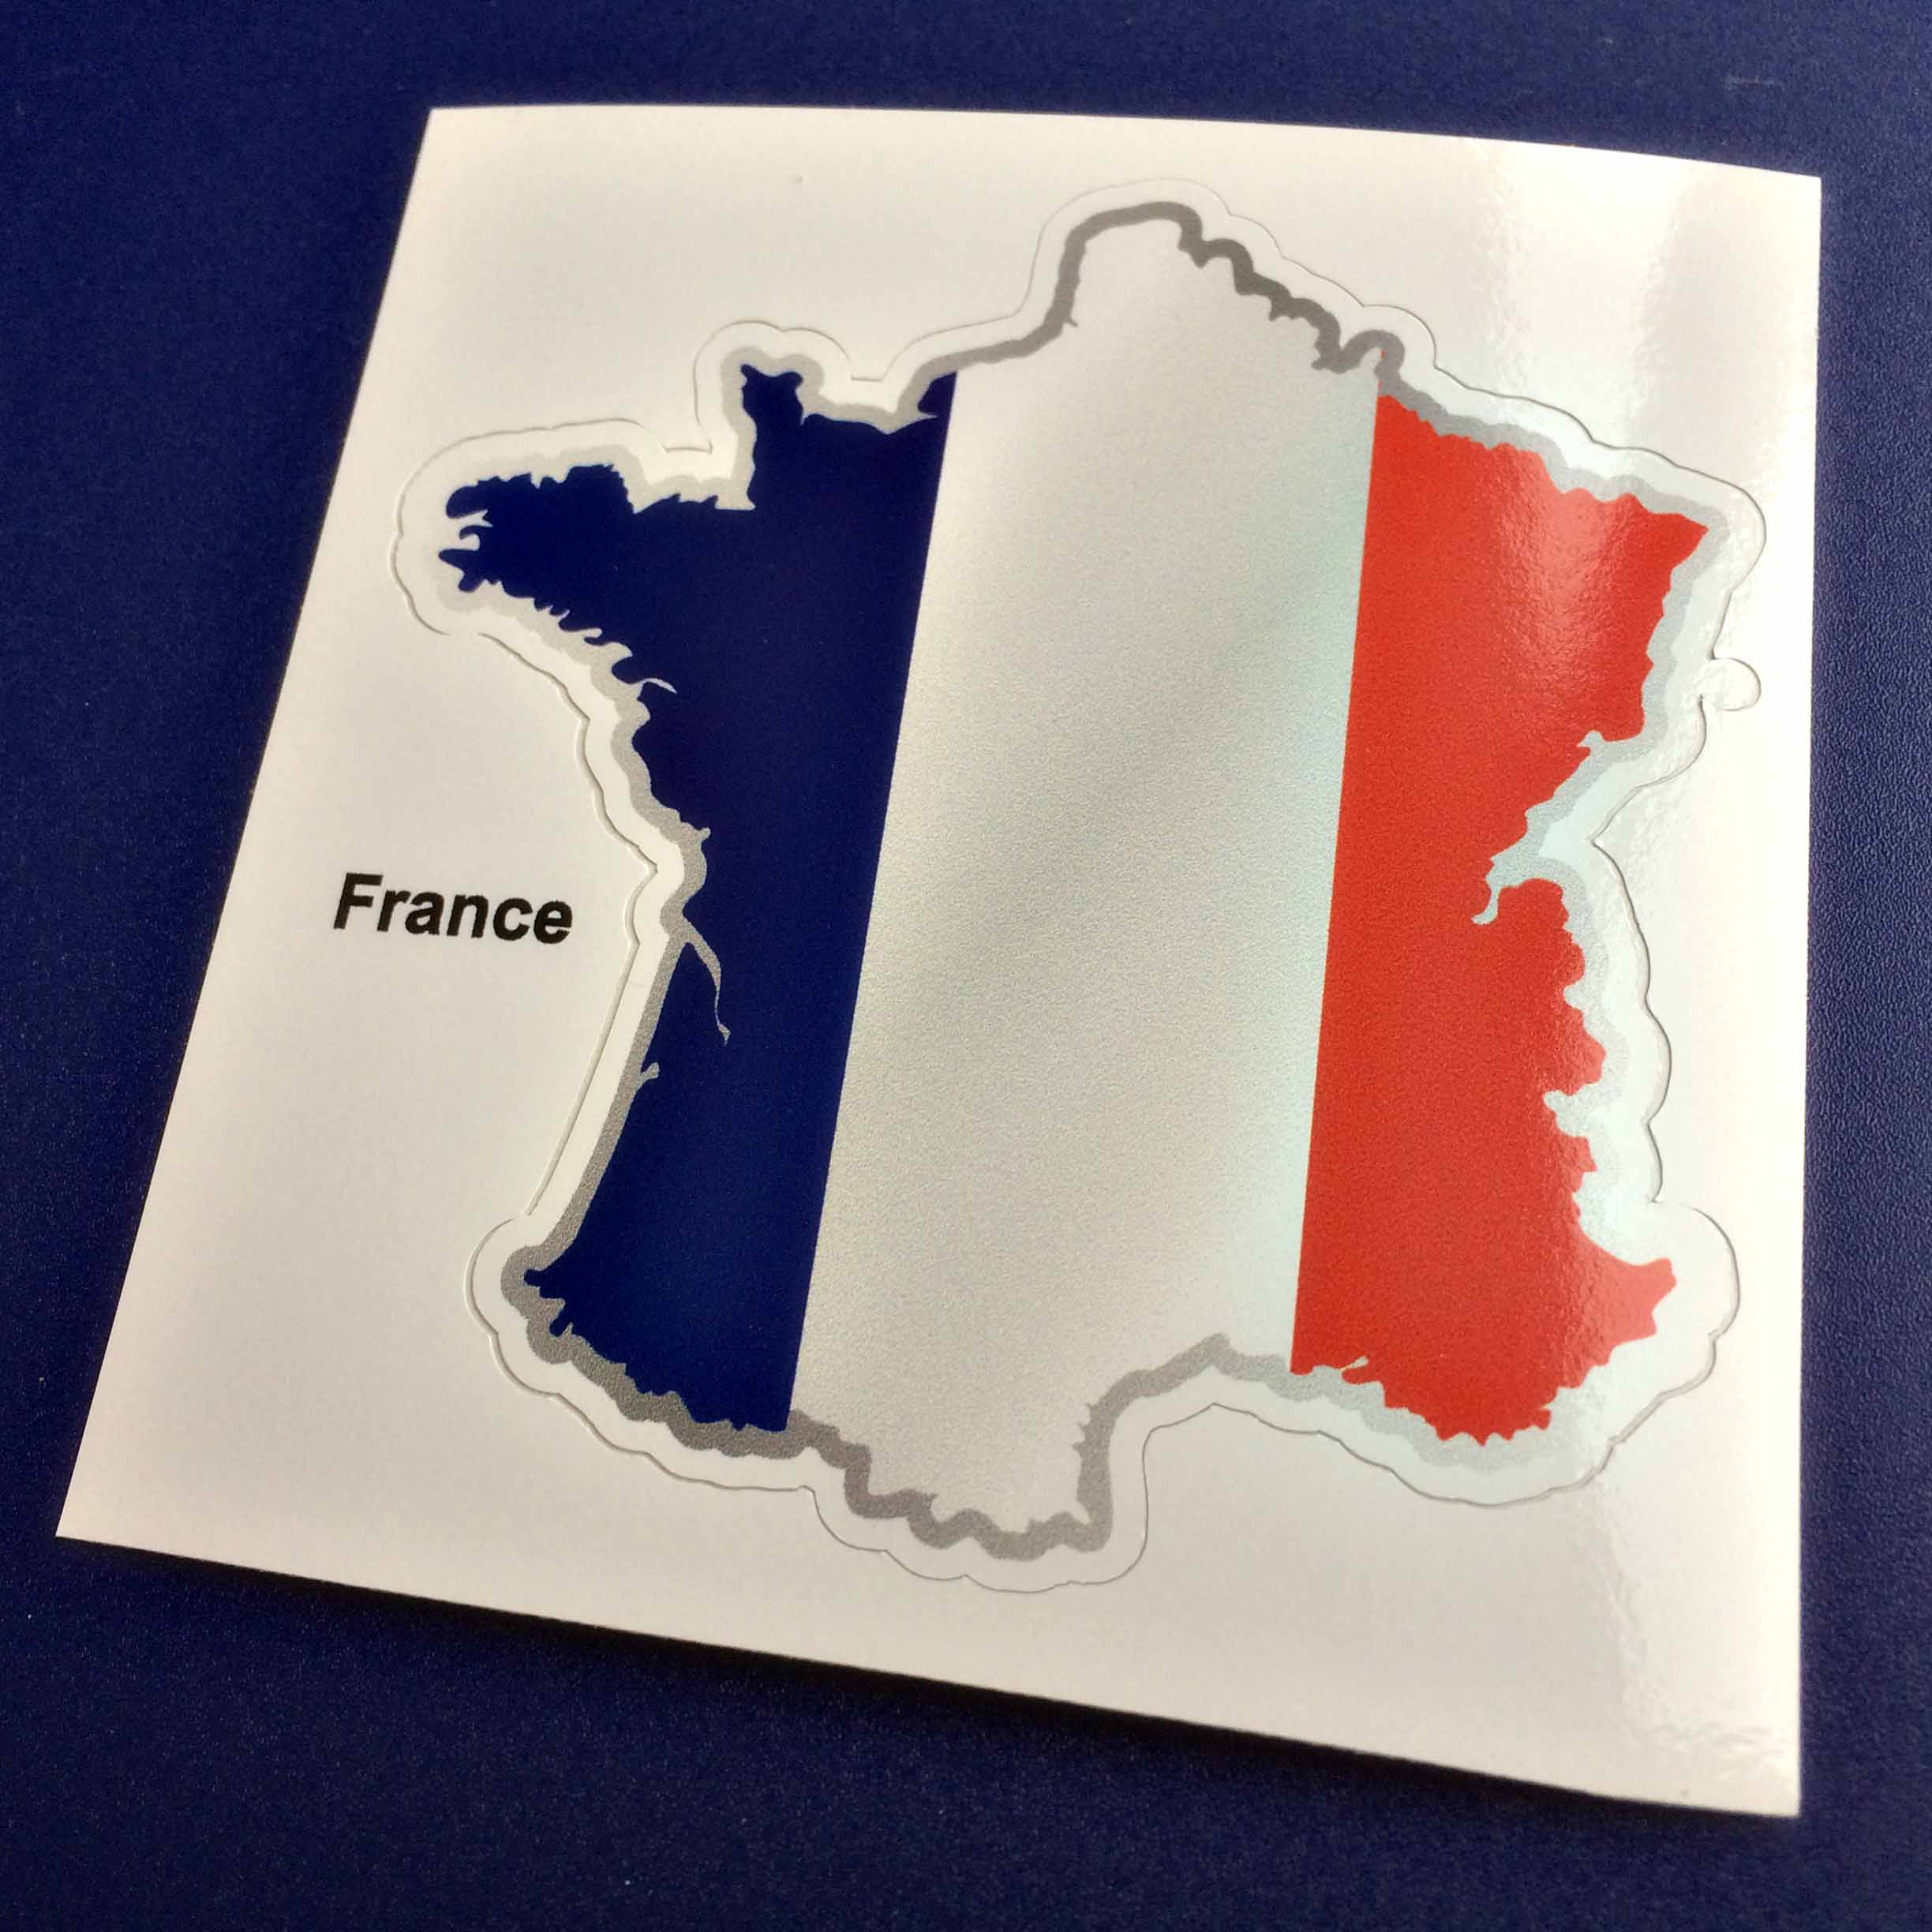 FRANCE FLAG MAP STICKER. A map and flag of France. A tricolour of three vertical bands in blue, white and red.